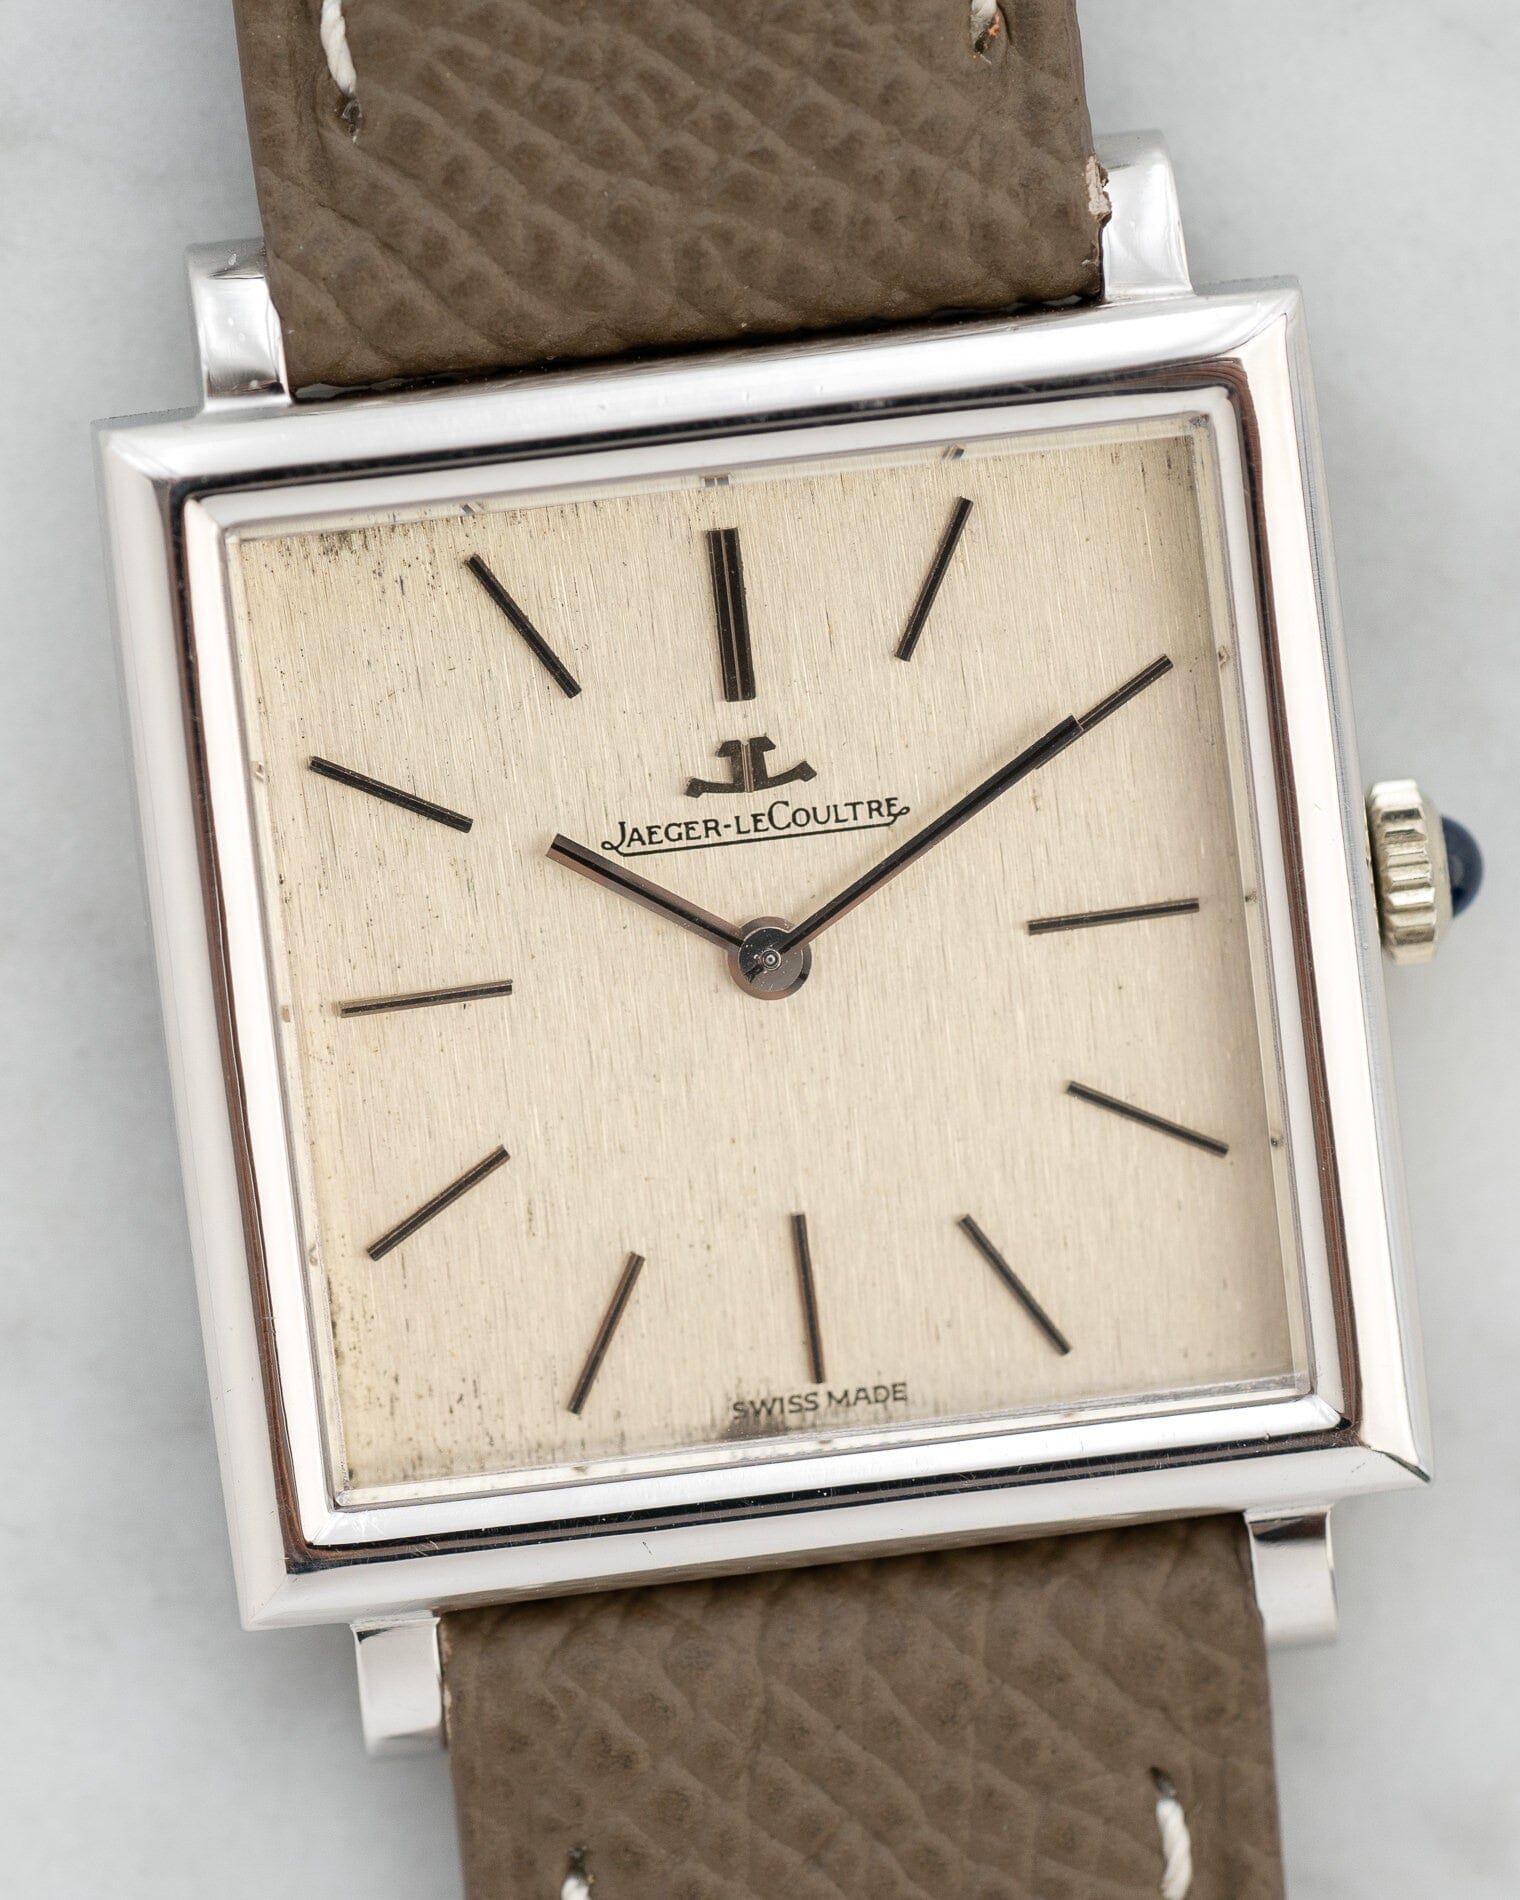 Jaeger-LeCoultre Square 4442 WG Snowflake Dial Watch Jaeger-LeCoultre 